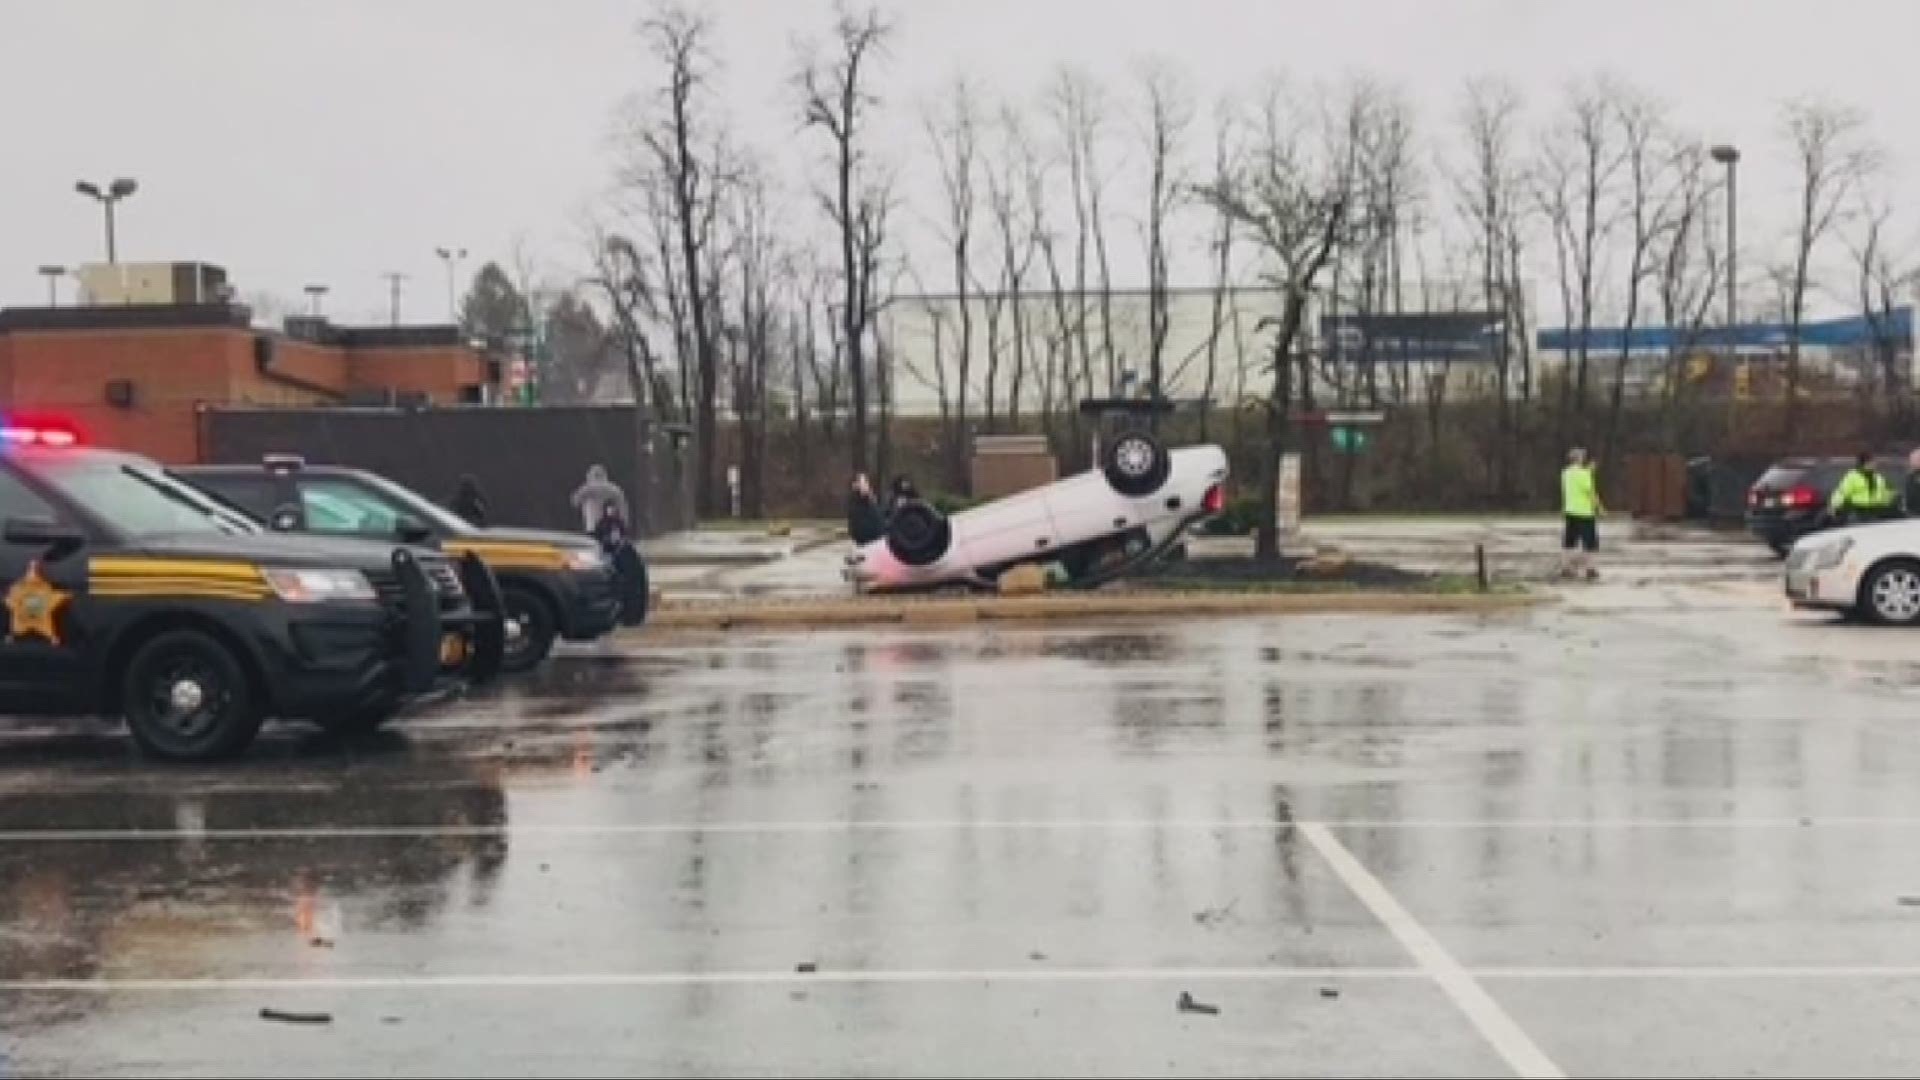 April 16, 2018: One of the hardest-hit areas from this weekend's storms is Summit County. WKYC's Austin Love has more details.